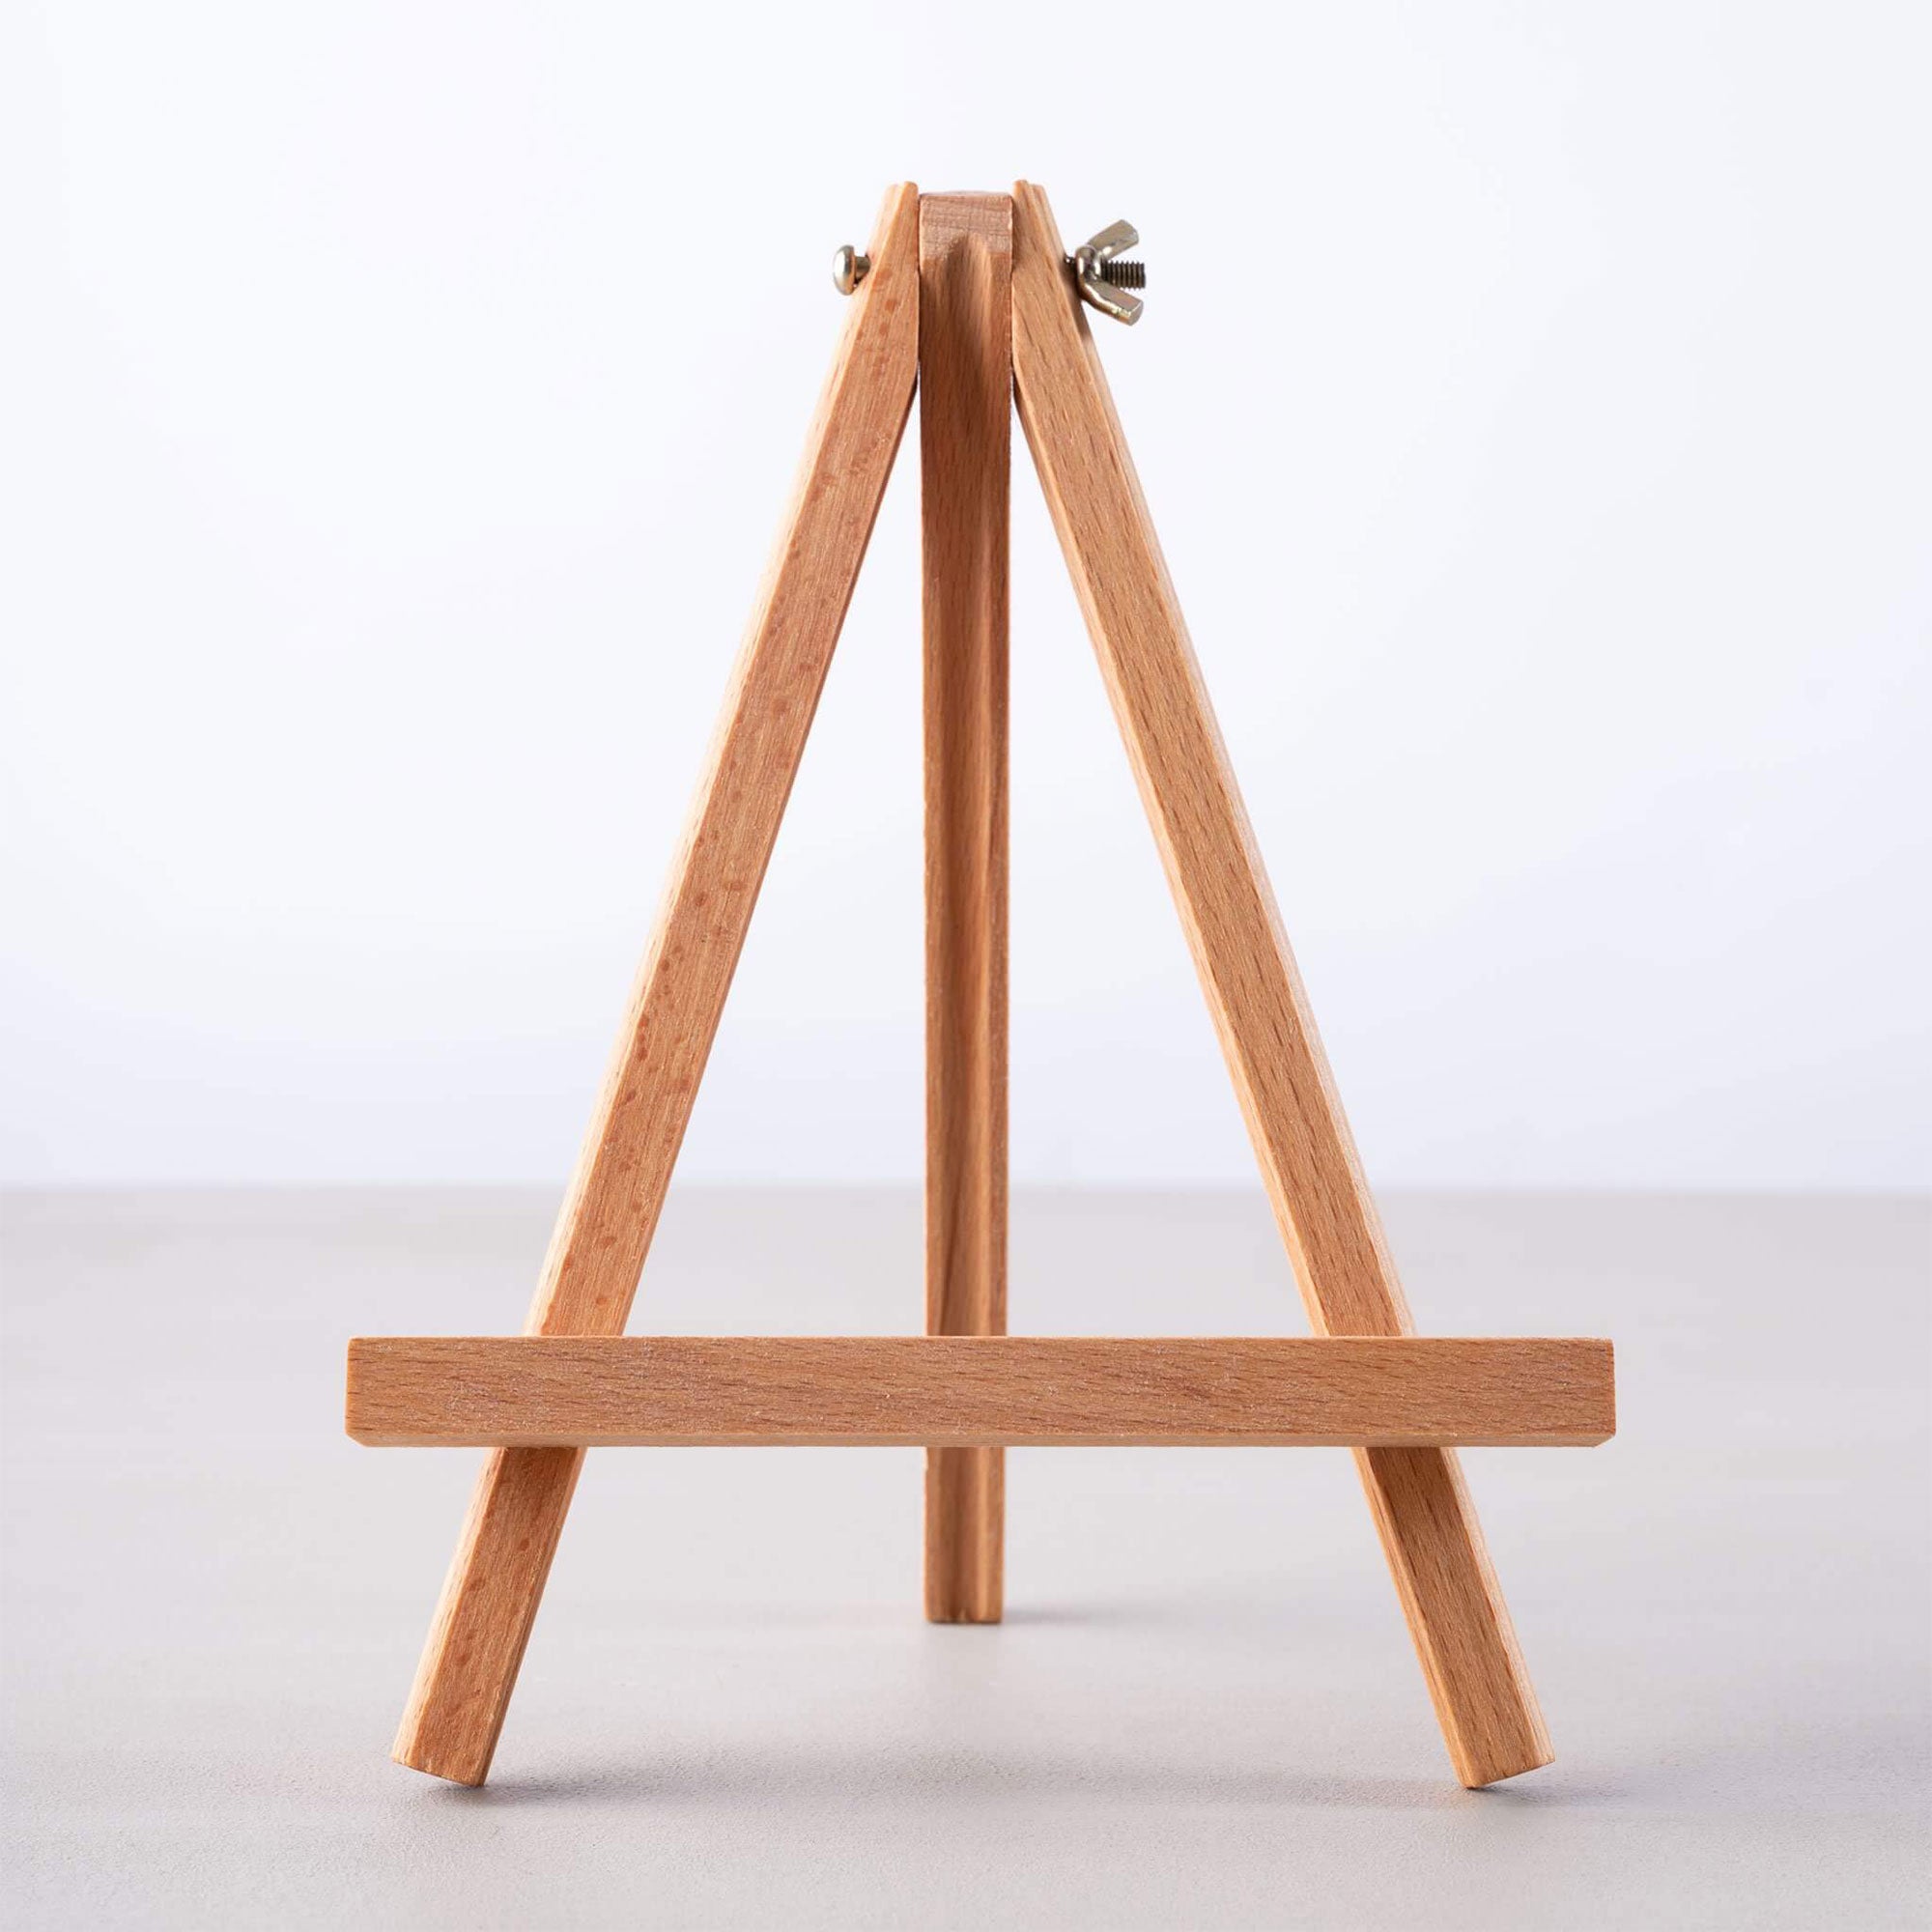 5 Mini Black Wood Display Easel (12 Pack), A-Frame Artist Painting Party  Tripod Easel, 5” - 12 Pack - City Market